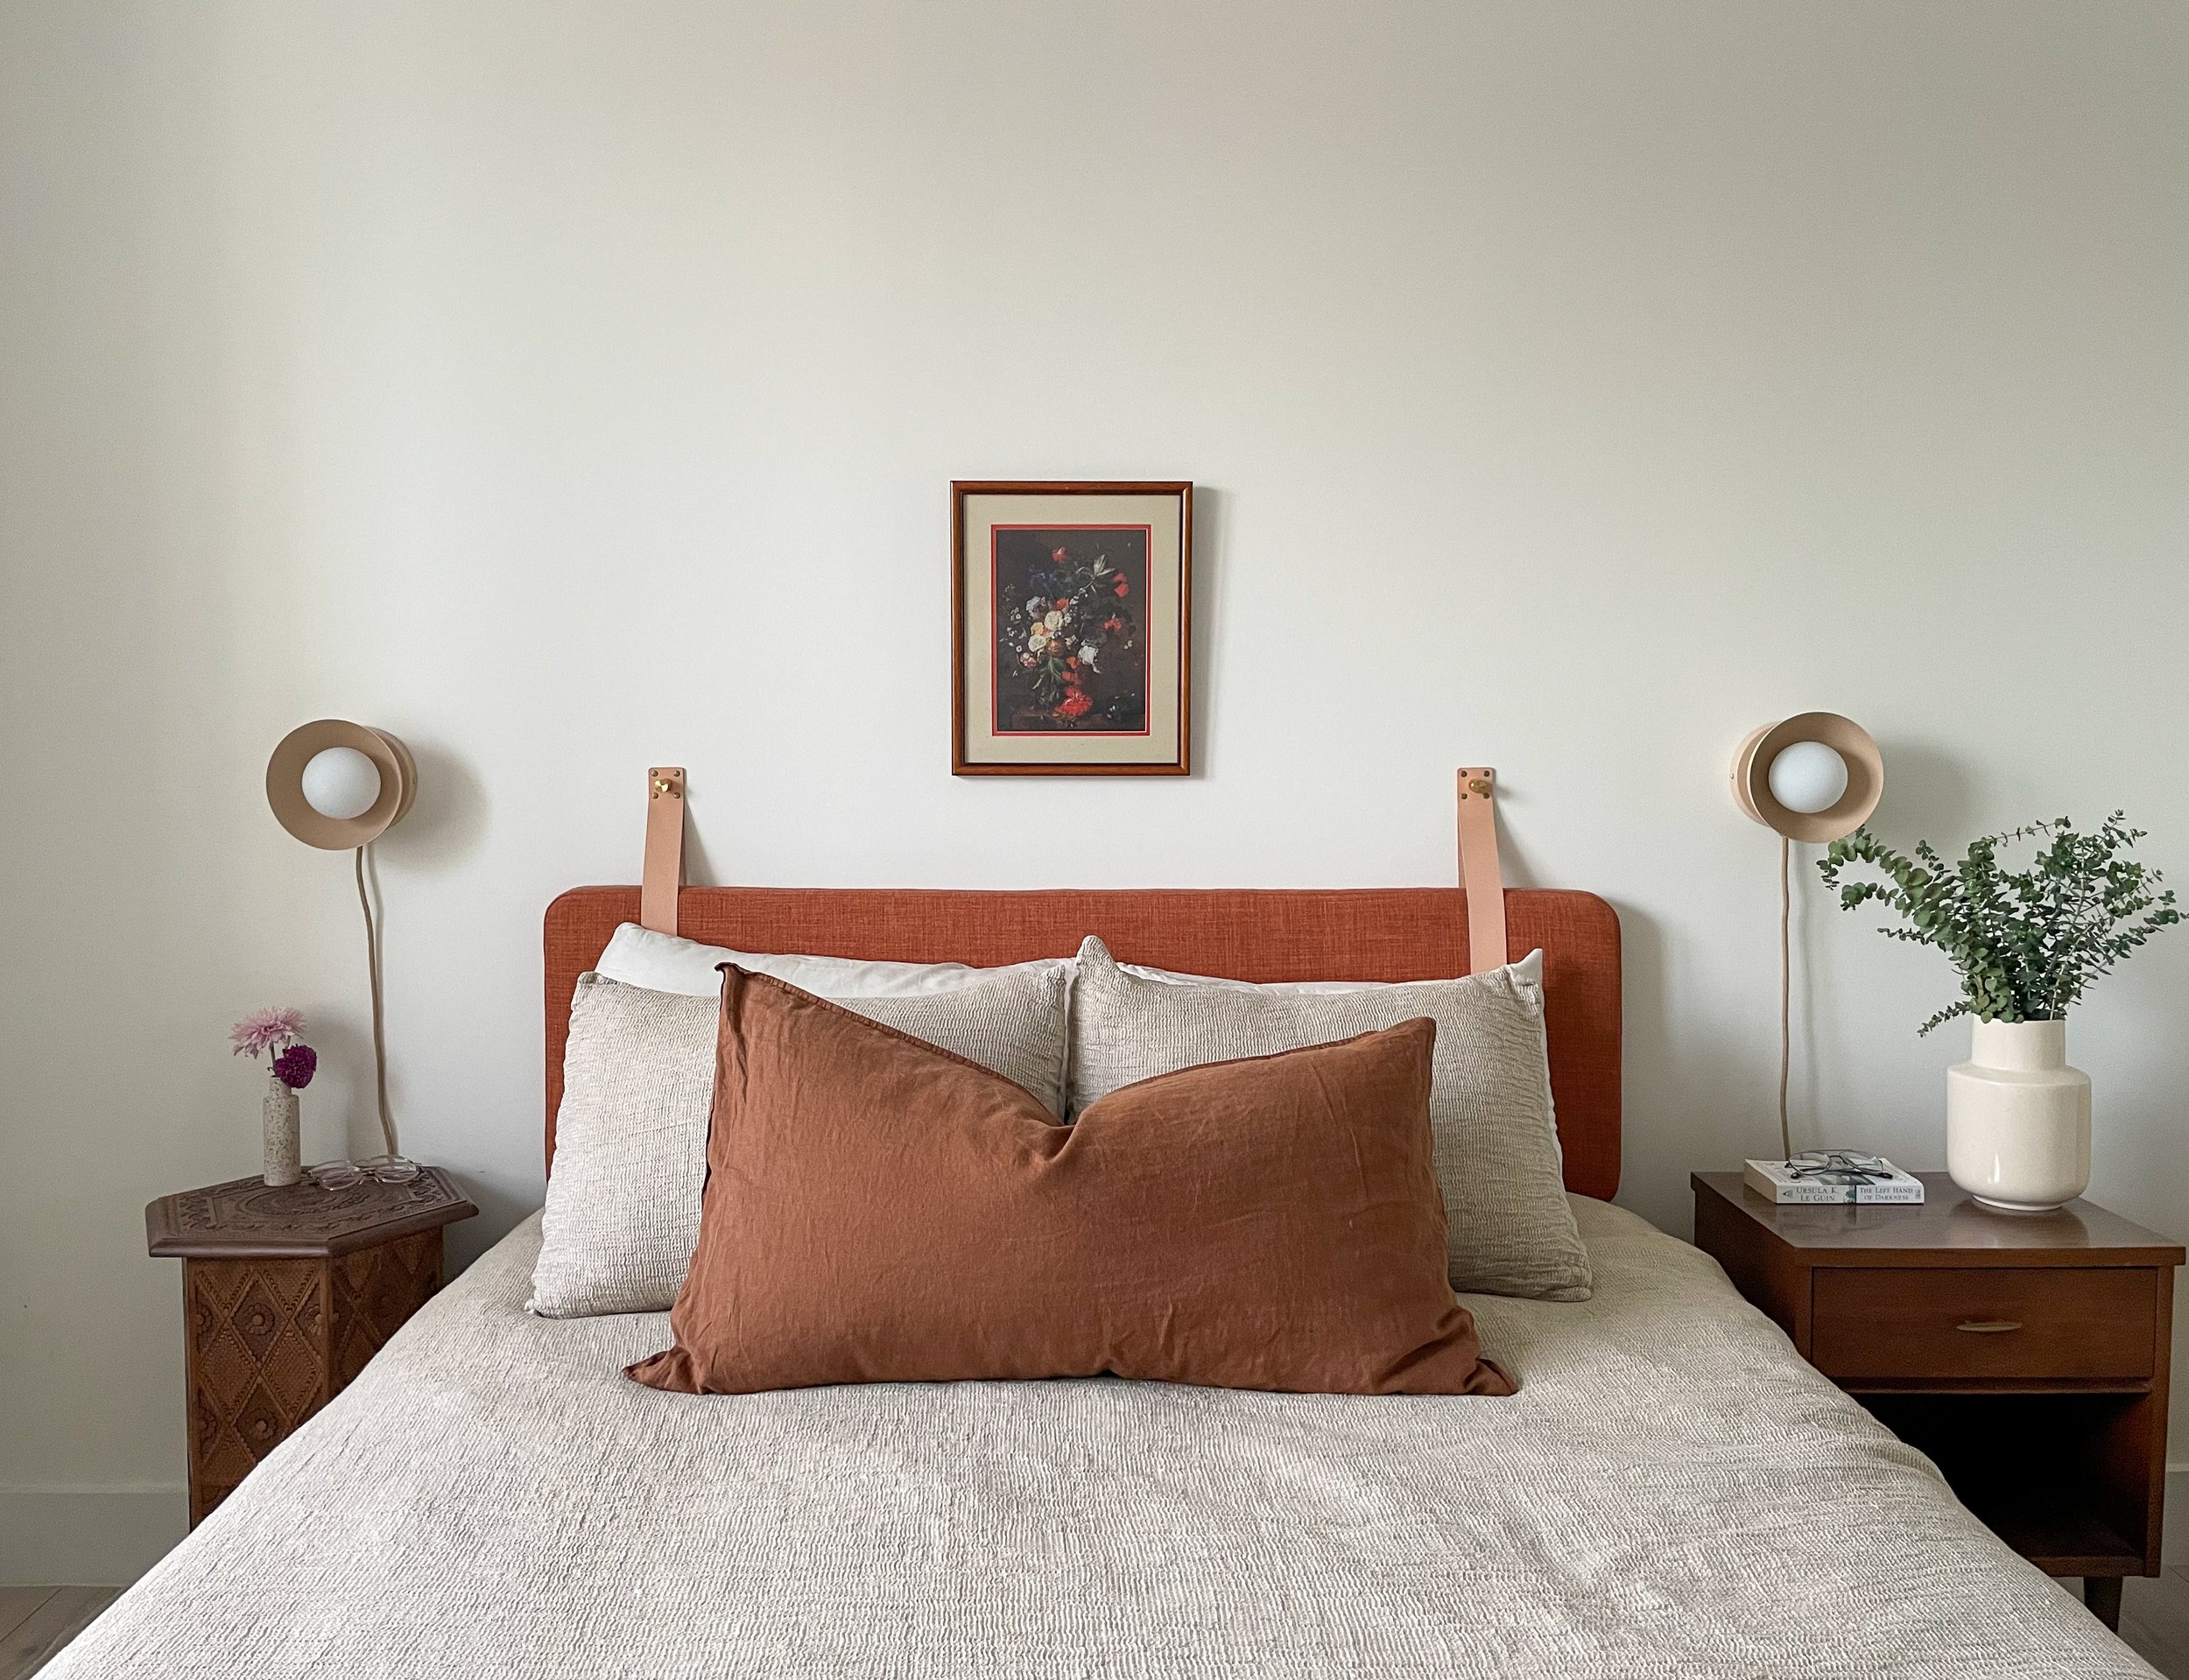 A head-on shot of a bed. There is a wall-hung headboard and a large brown throw pillow on it.